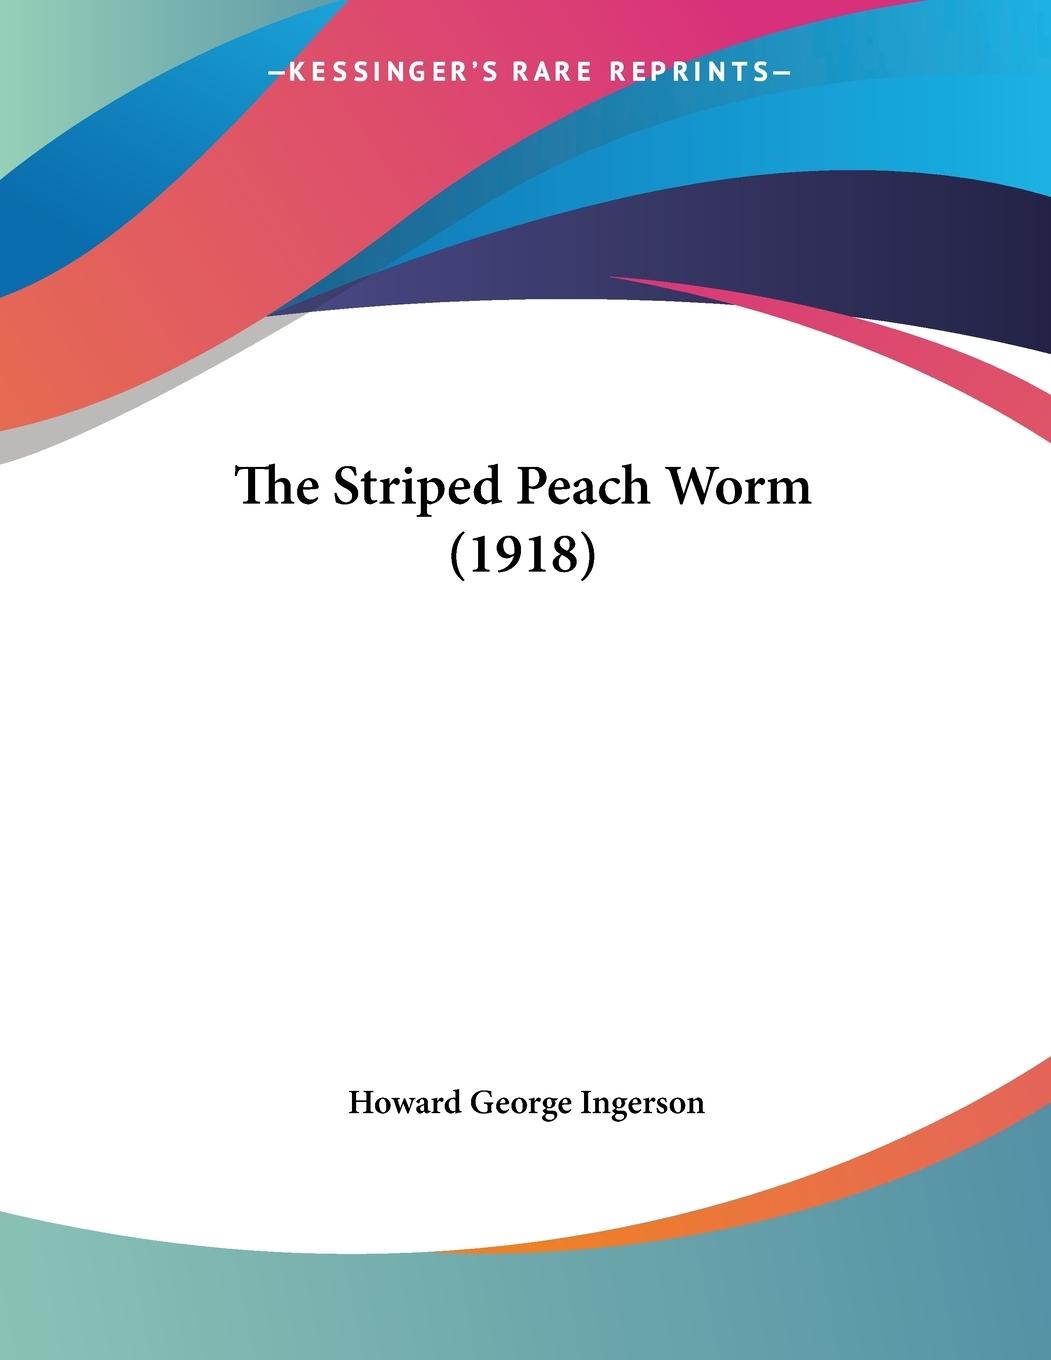 The Striped Peach Worm (1918) - Ingerson, Howard George